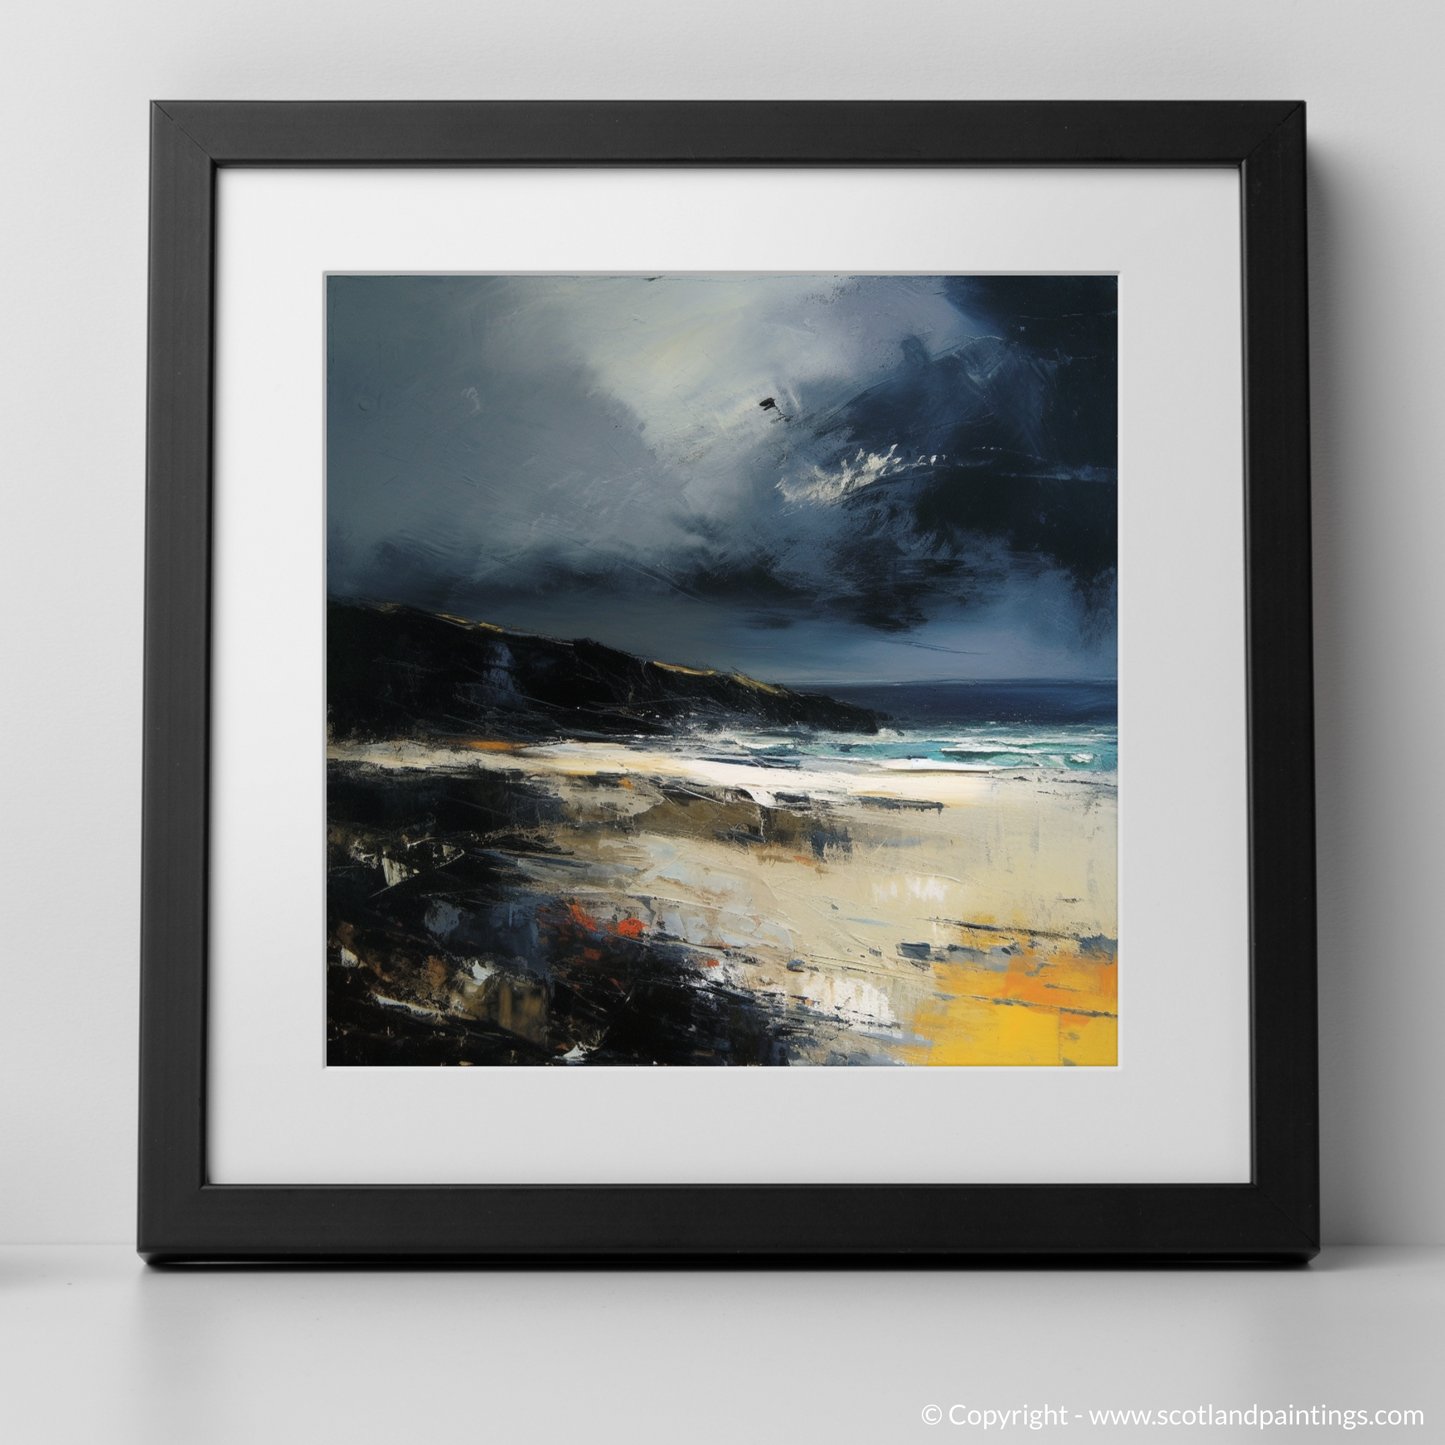 Storm's Embrace: The Power of Durness Beach